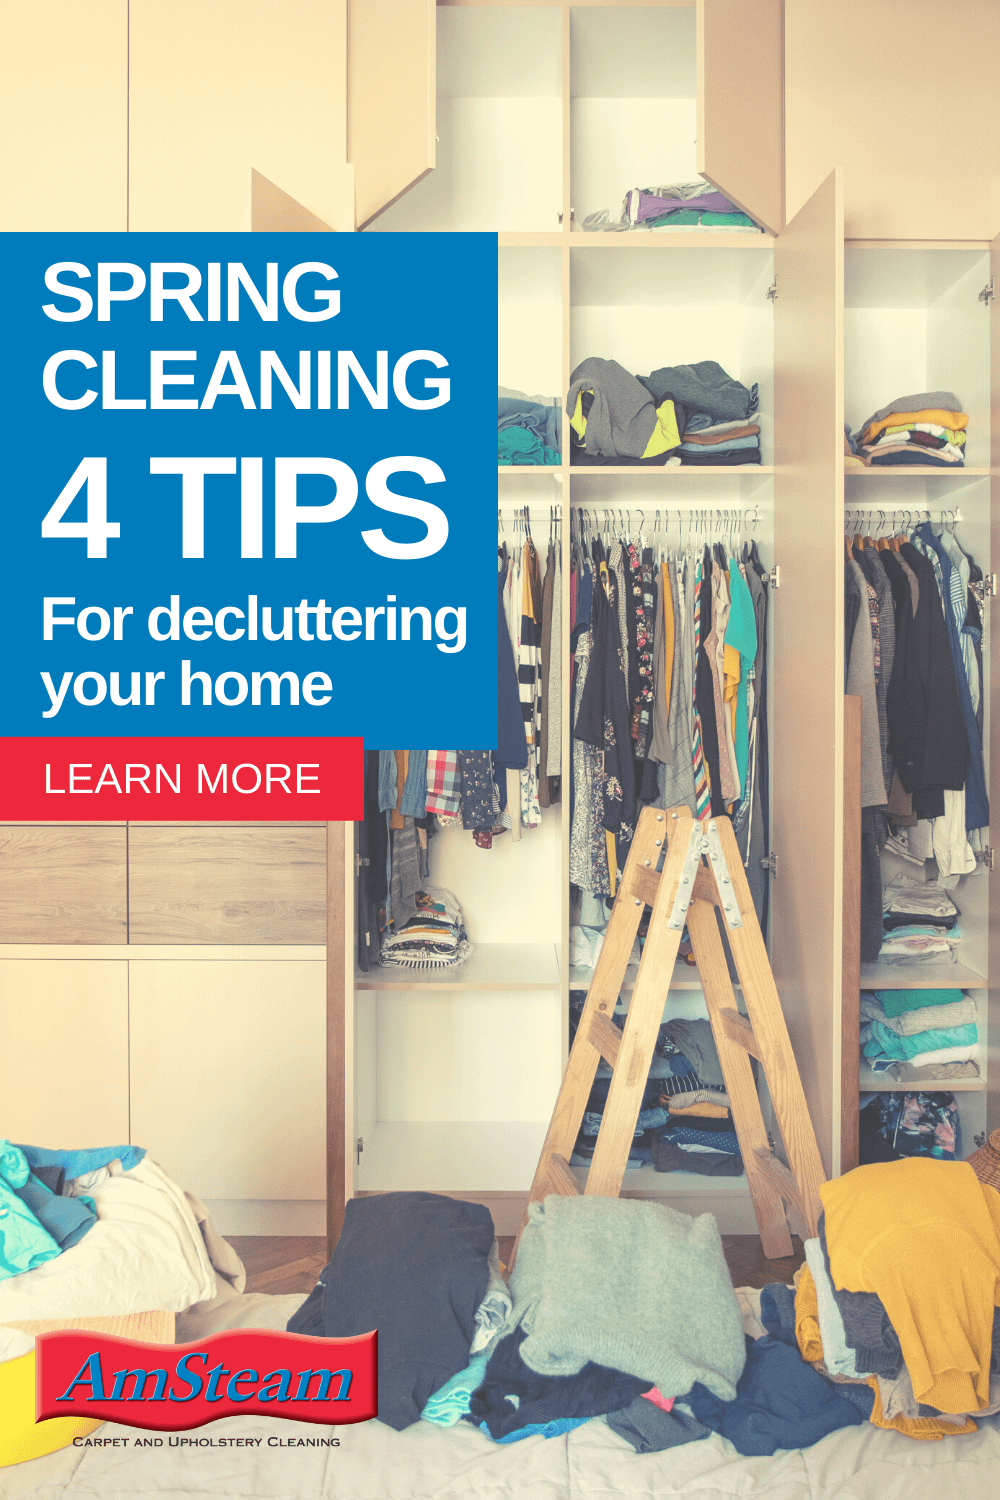 Spring Cleaning 4 tips for decluttering your home